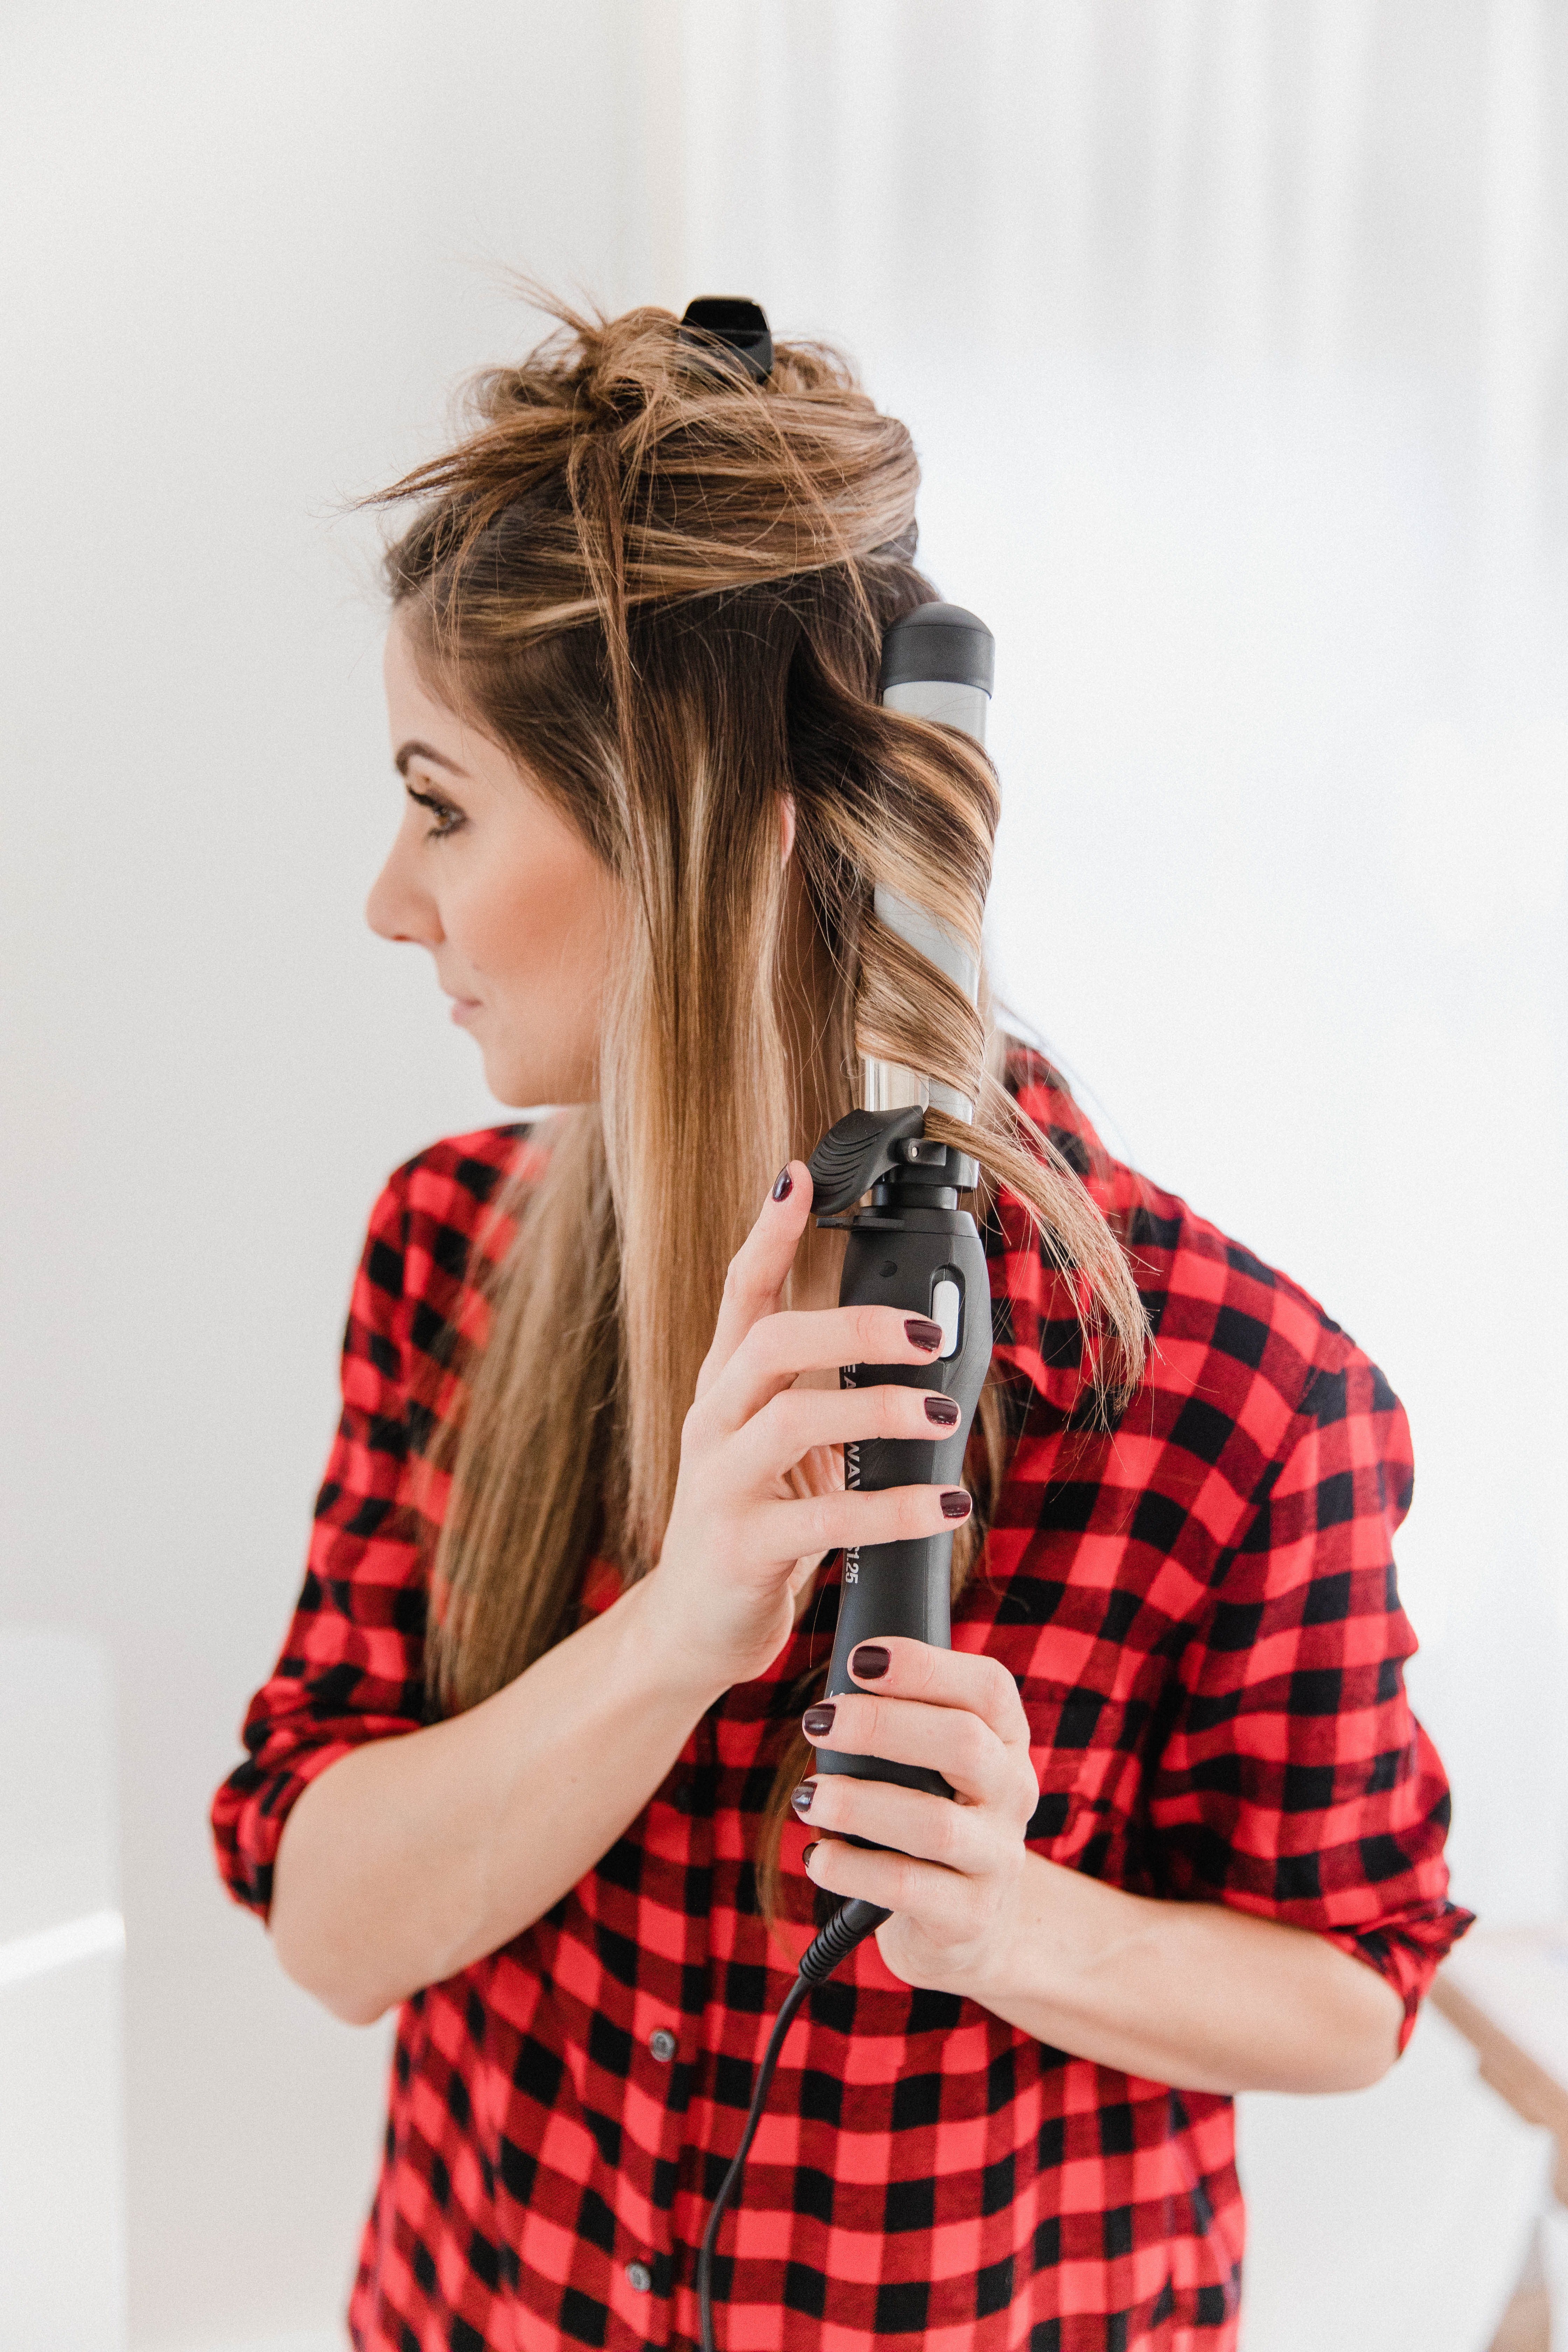 Connecticut life and style blogger Lauren McBride shares her Beachwaver Review and her thoughts on this user-friendly curling wand.